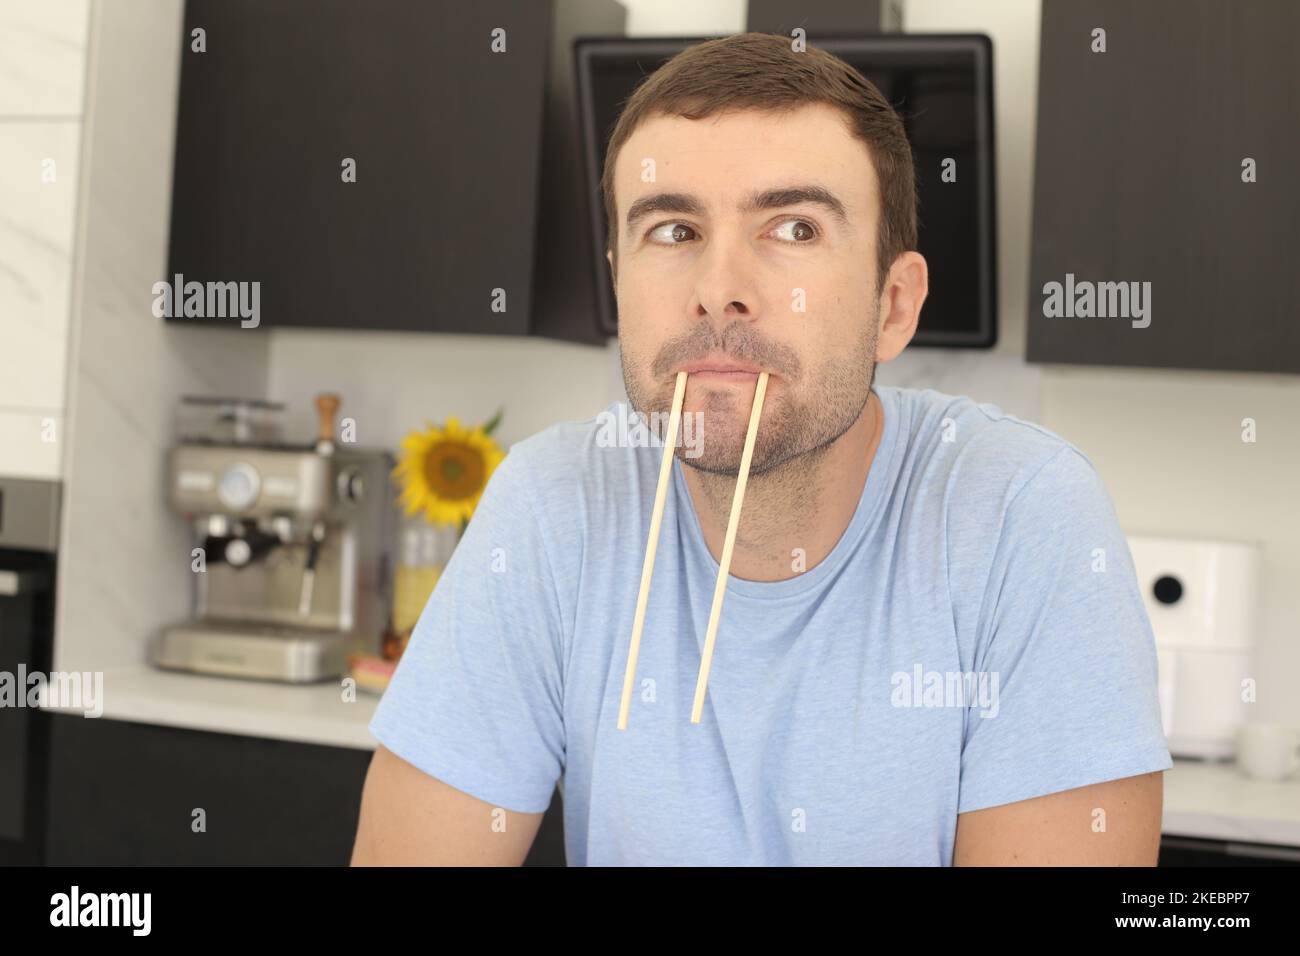 Man making funny face with pair of chopsticks Stock Photo